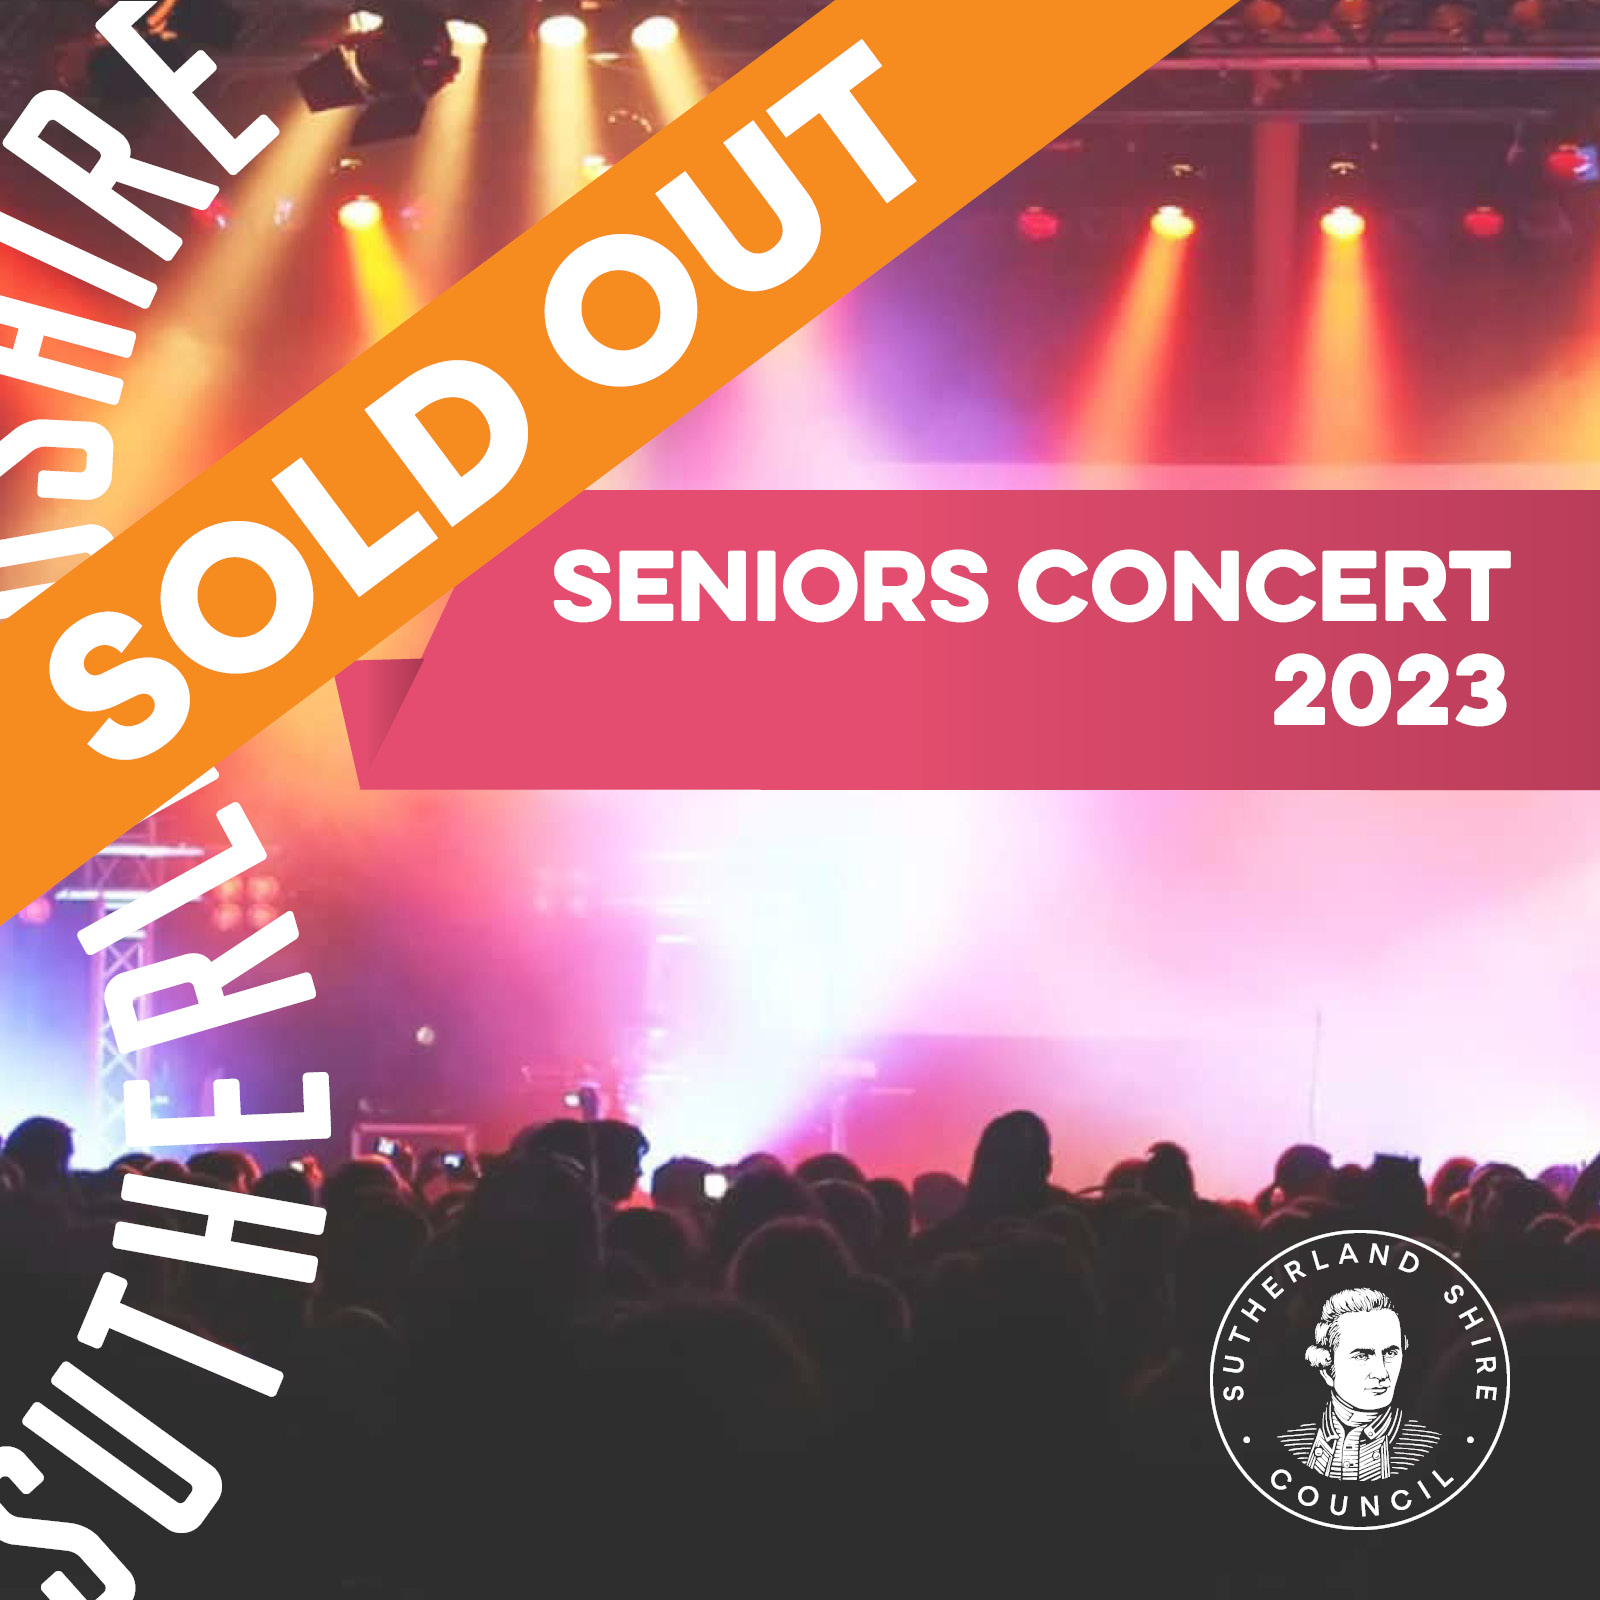 Seniors Concert 2023 Sold Out